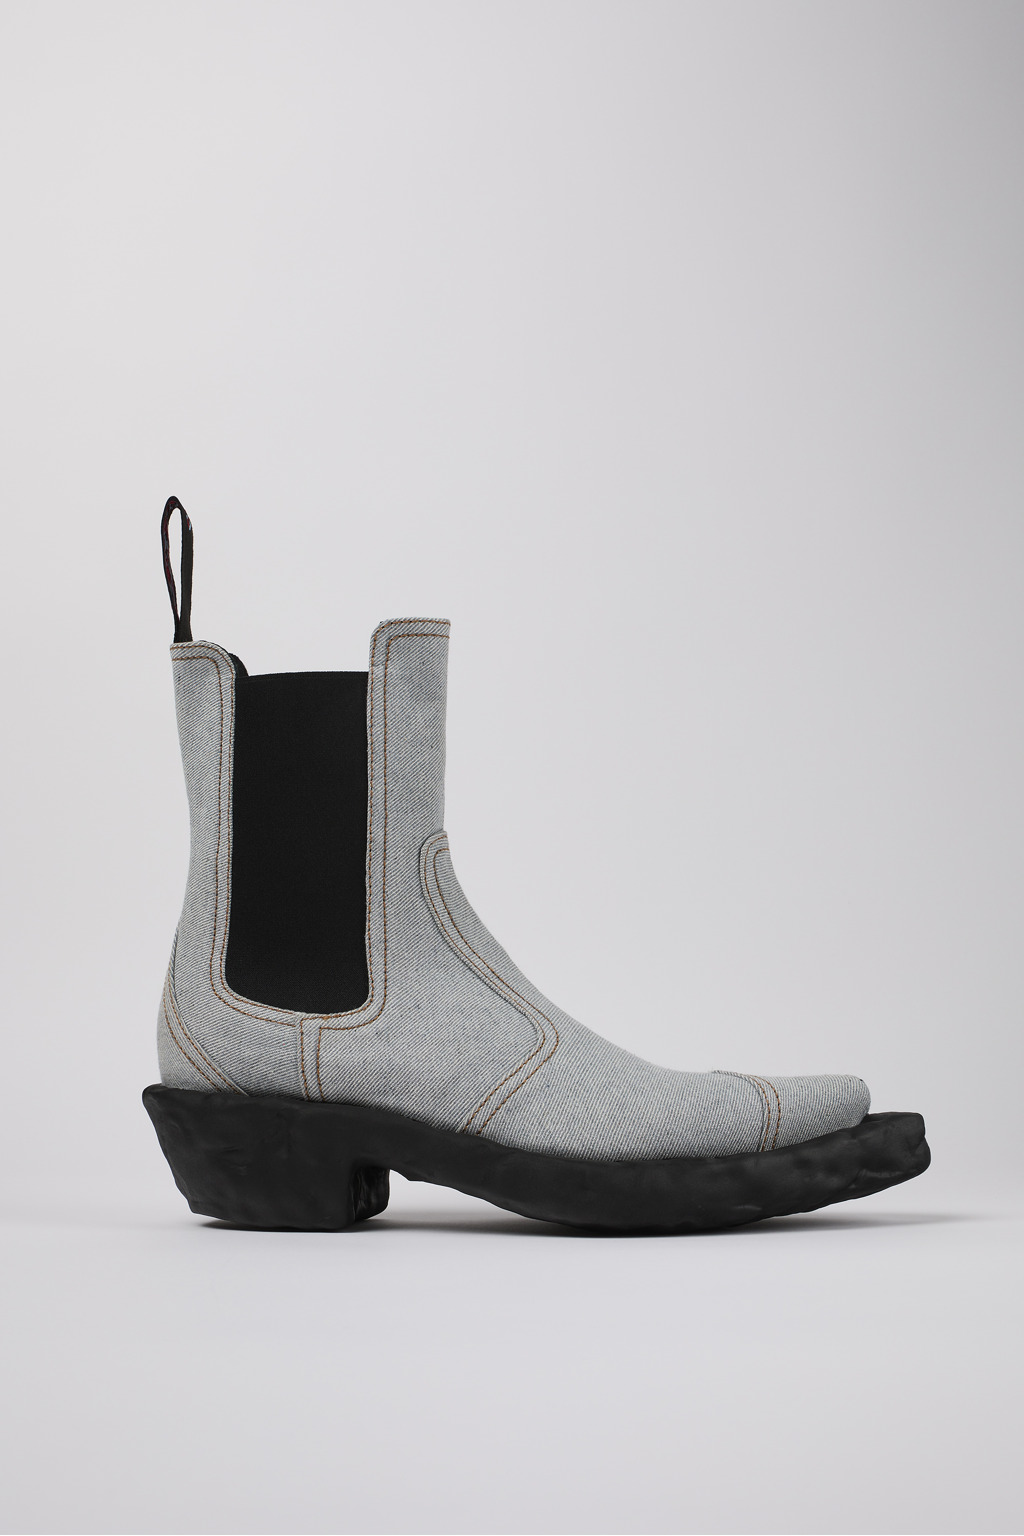 Venga Blue Boots for Unisex - Fall/Winter collection - Camper USA